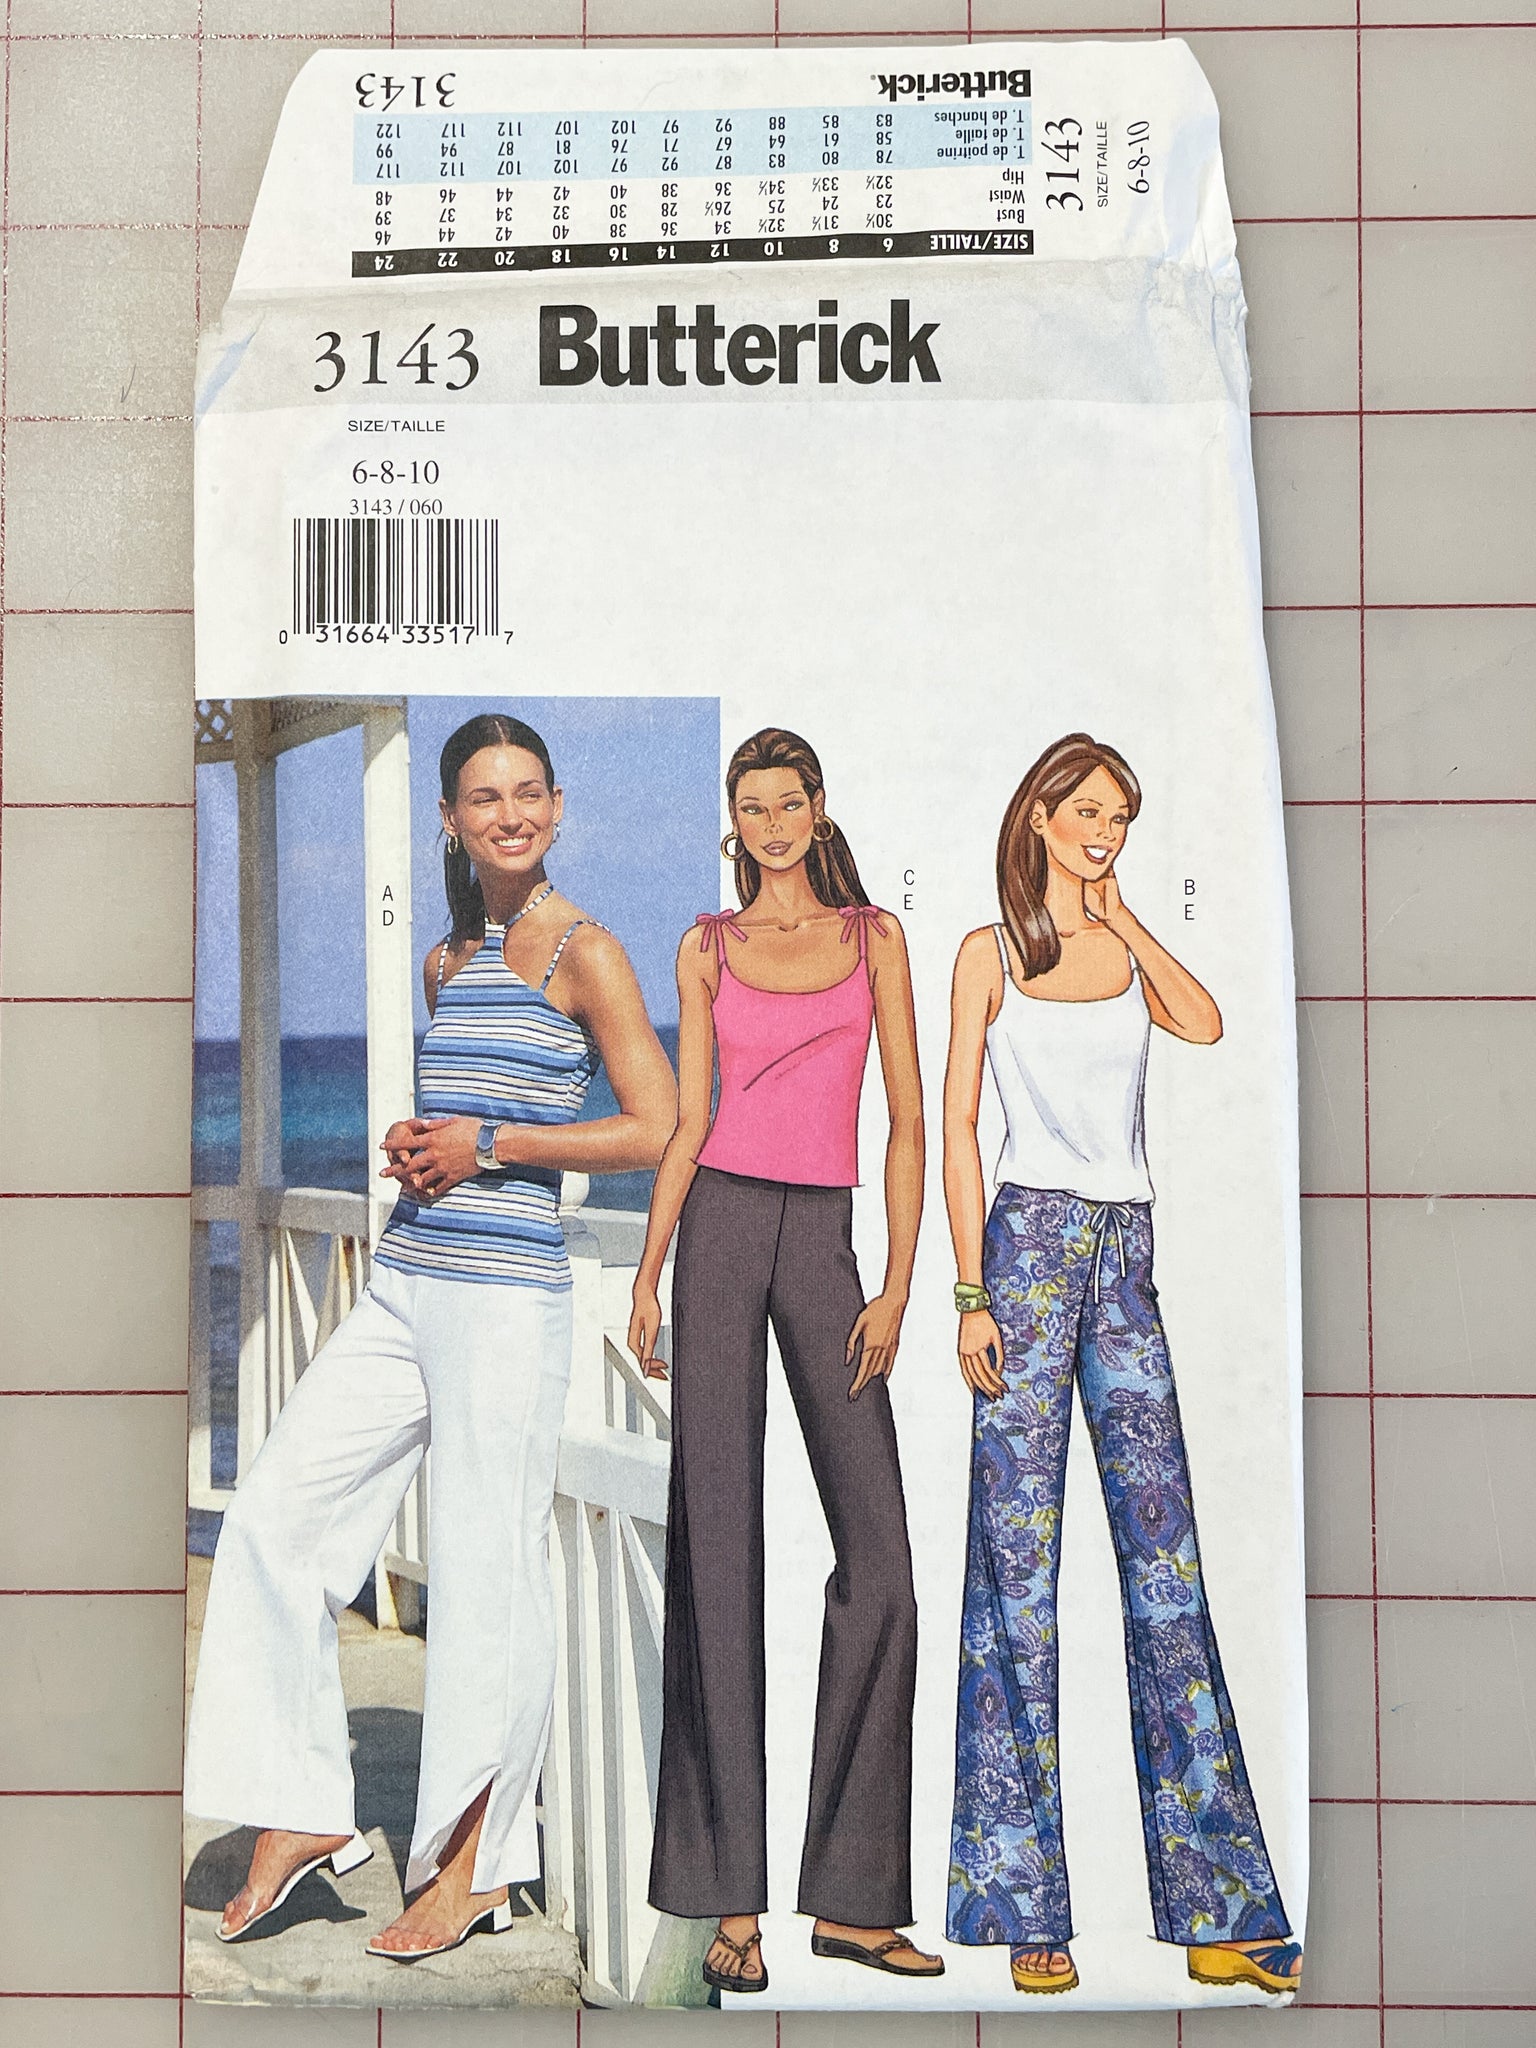 SALE 2001 Butterick 3143 Pattern - Knit Top and Pants FACTORY FOLDED